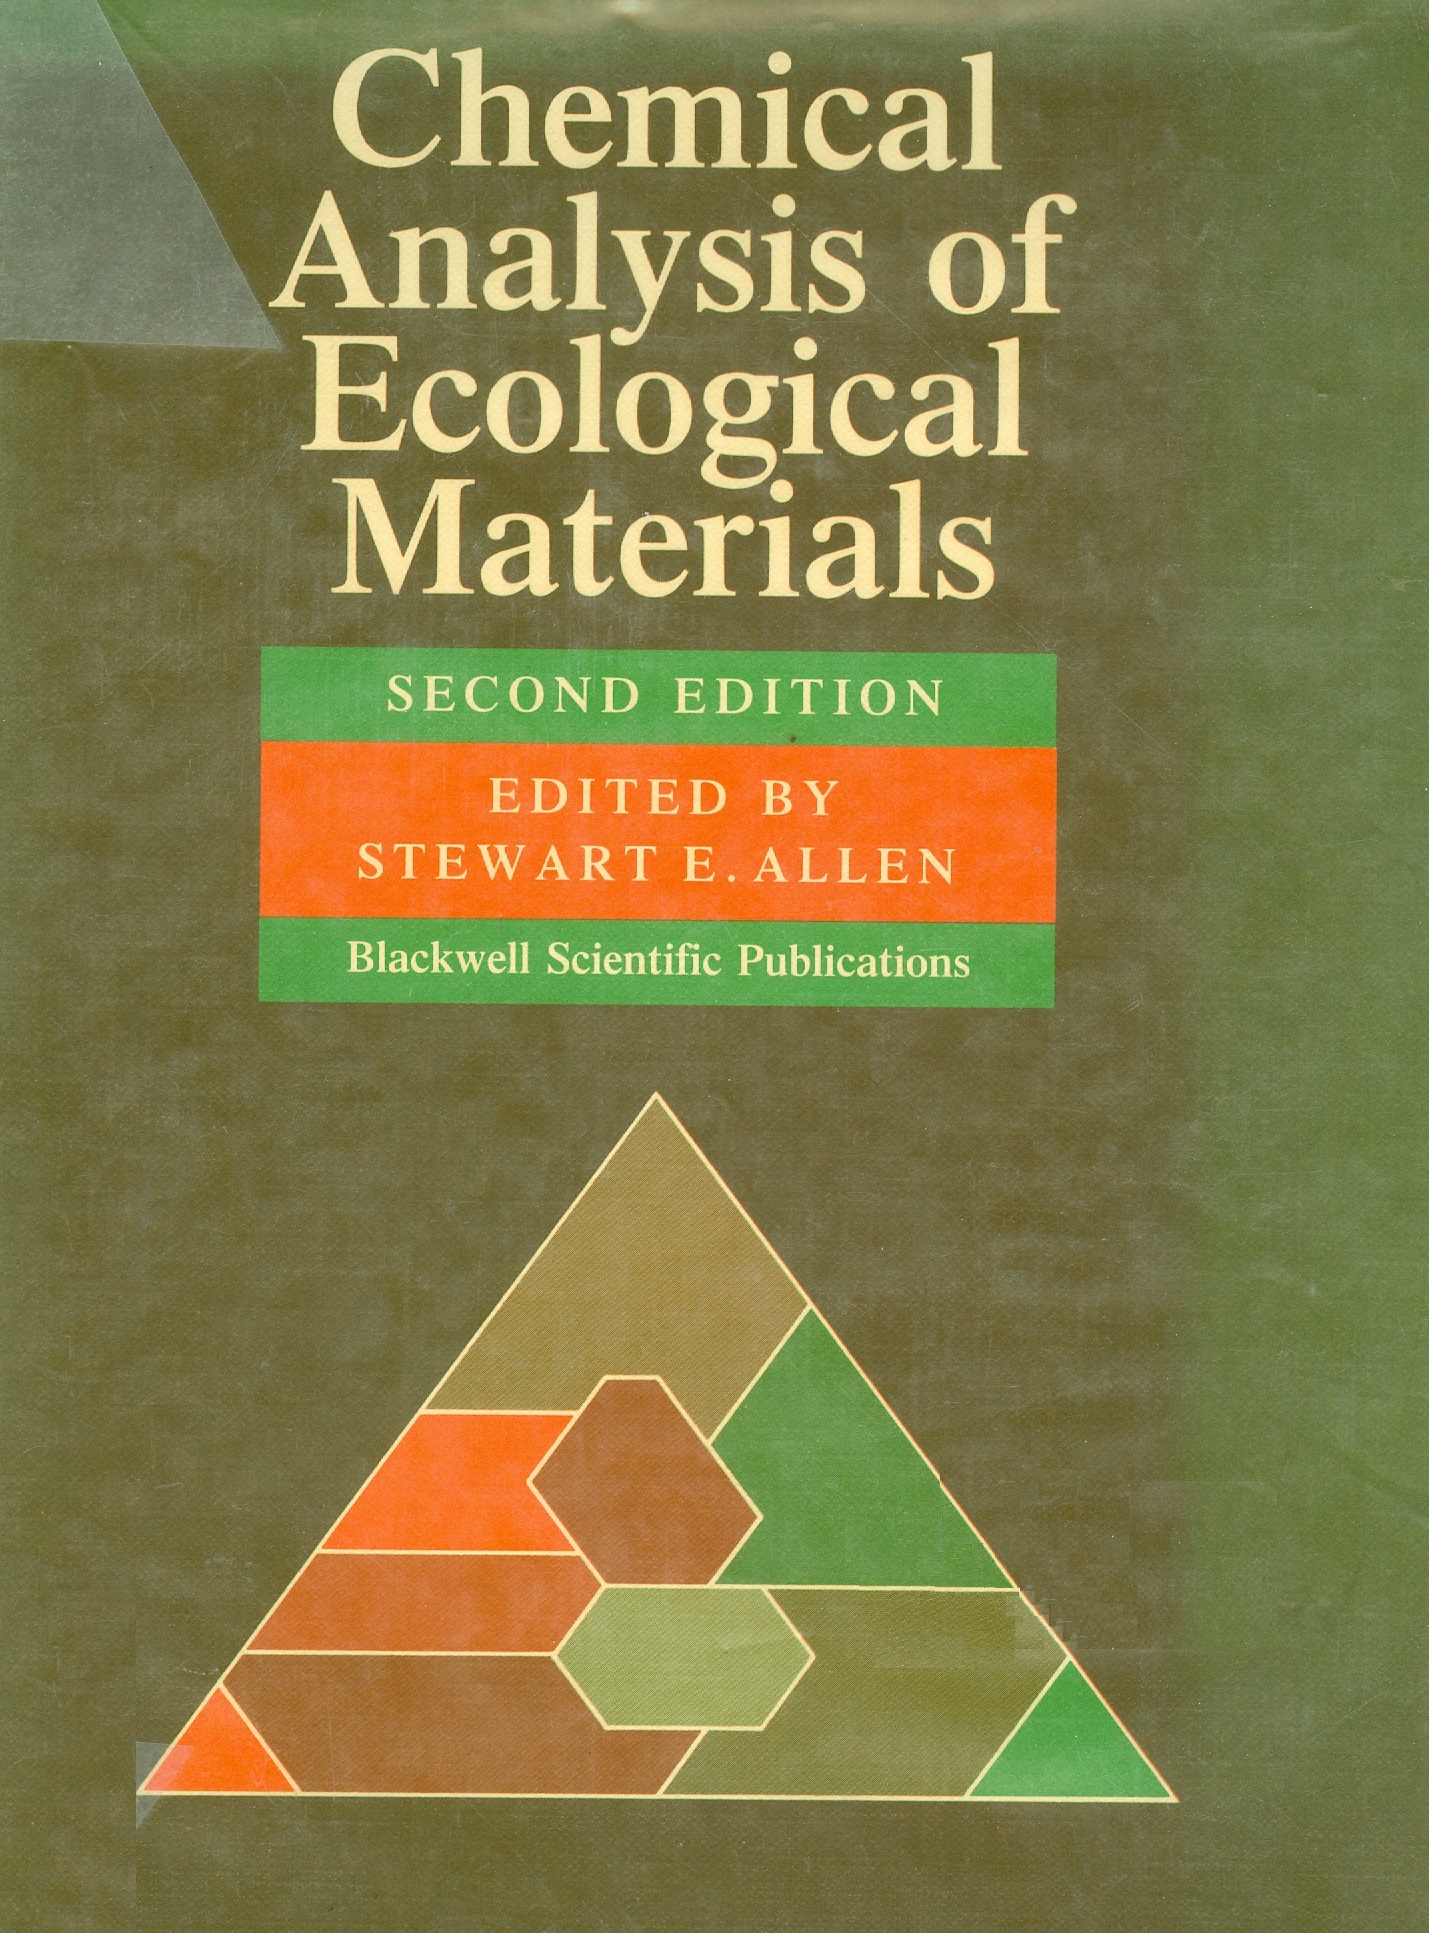 Chemical analysis of ecological materials / edited by Stewart E. Allen